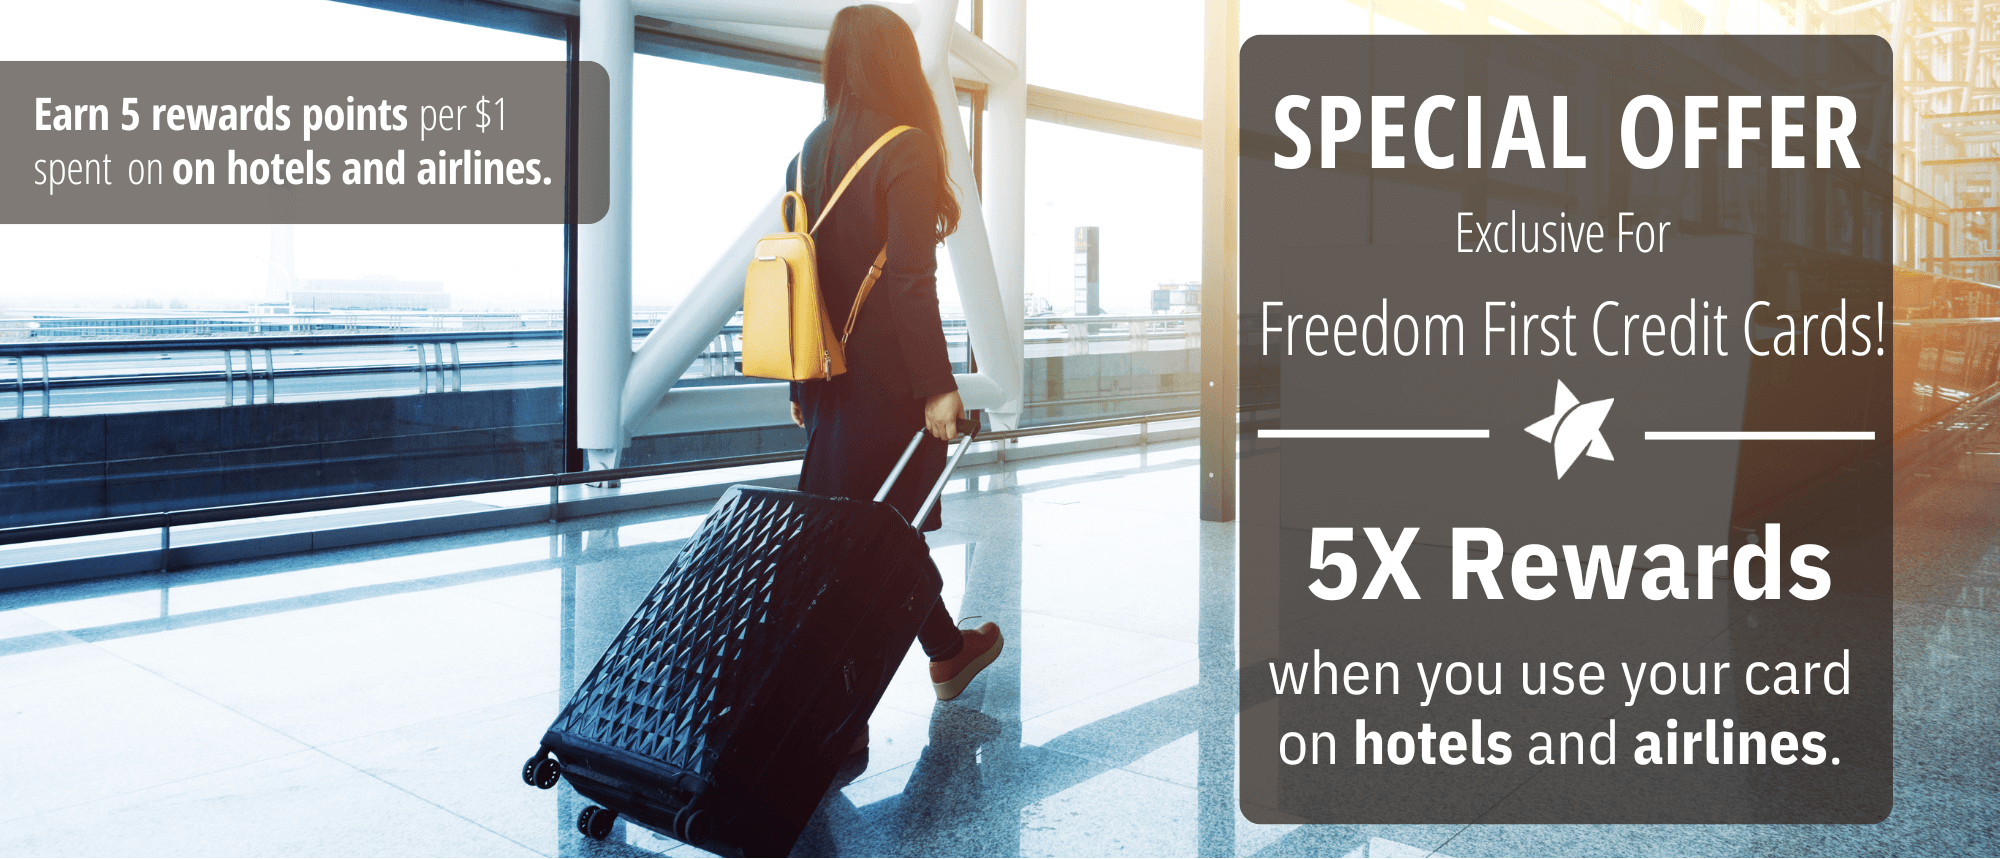 5X rewards when you use your card on hotels and airlines